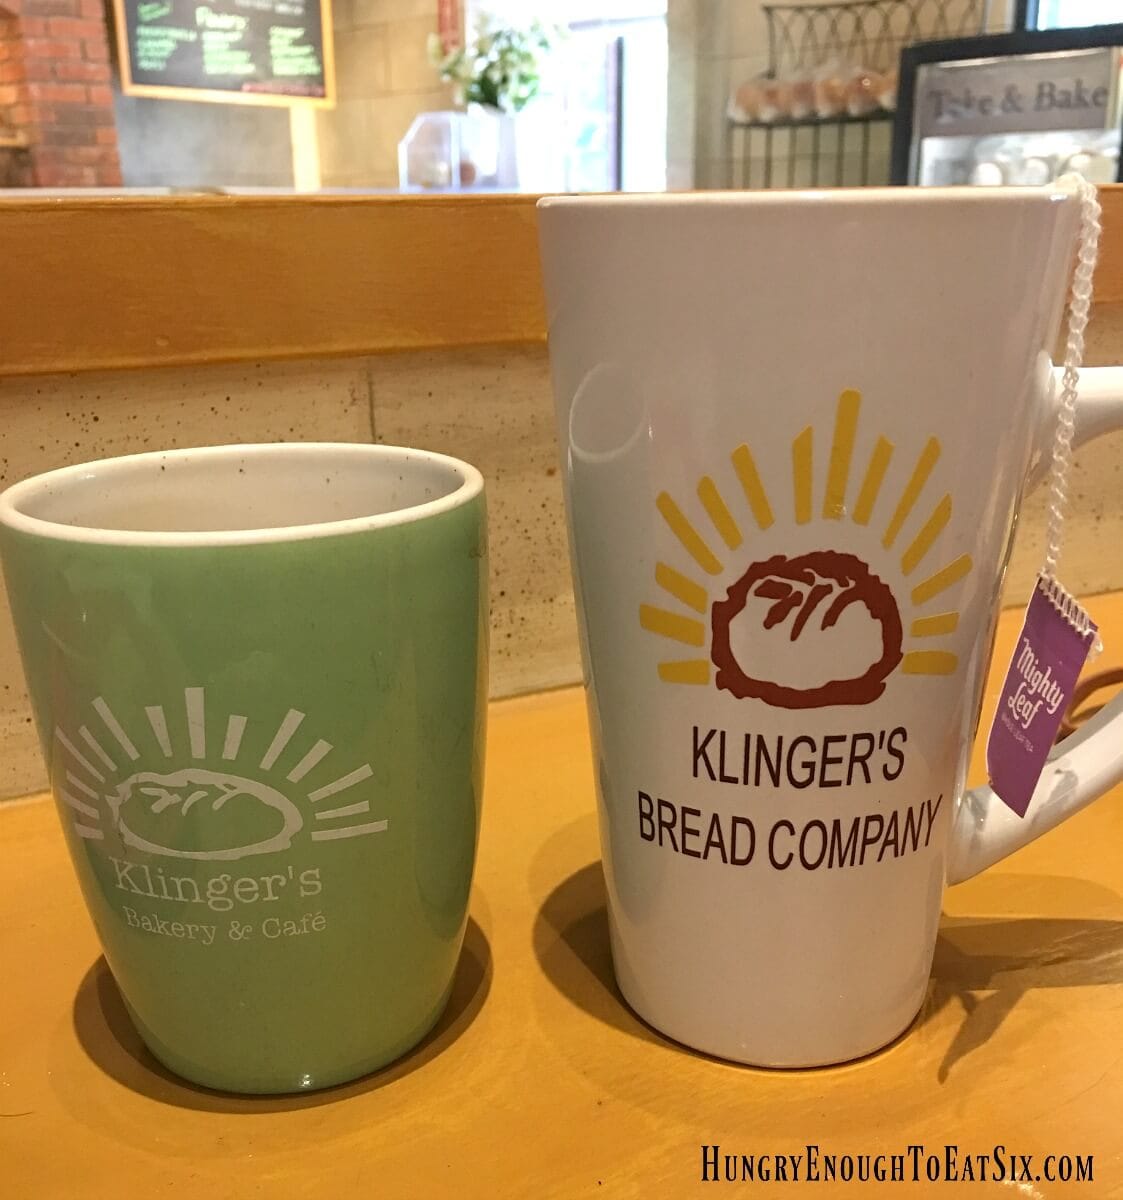 There are 8 bakeries on King Arthur Flour's Vermont Bakery Tour. Join me as I try them all! First stop: Klinger's Bakery & Cafe.